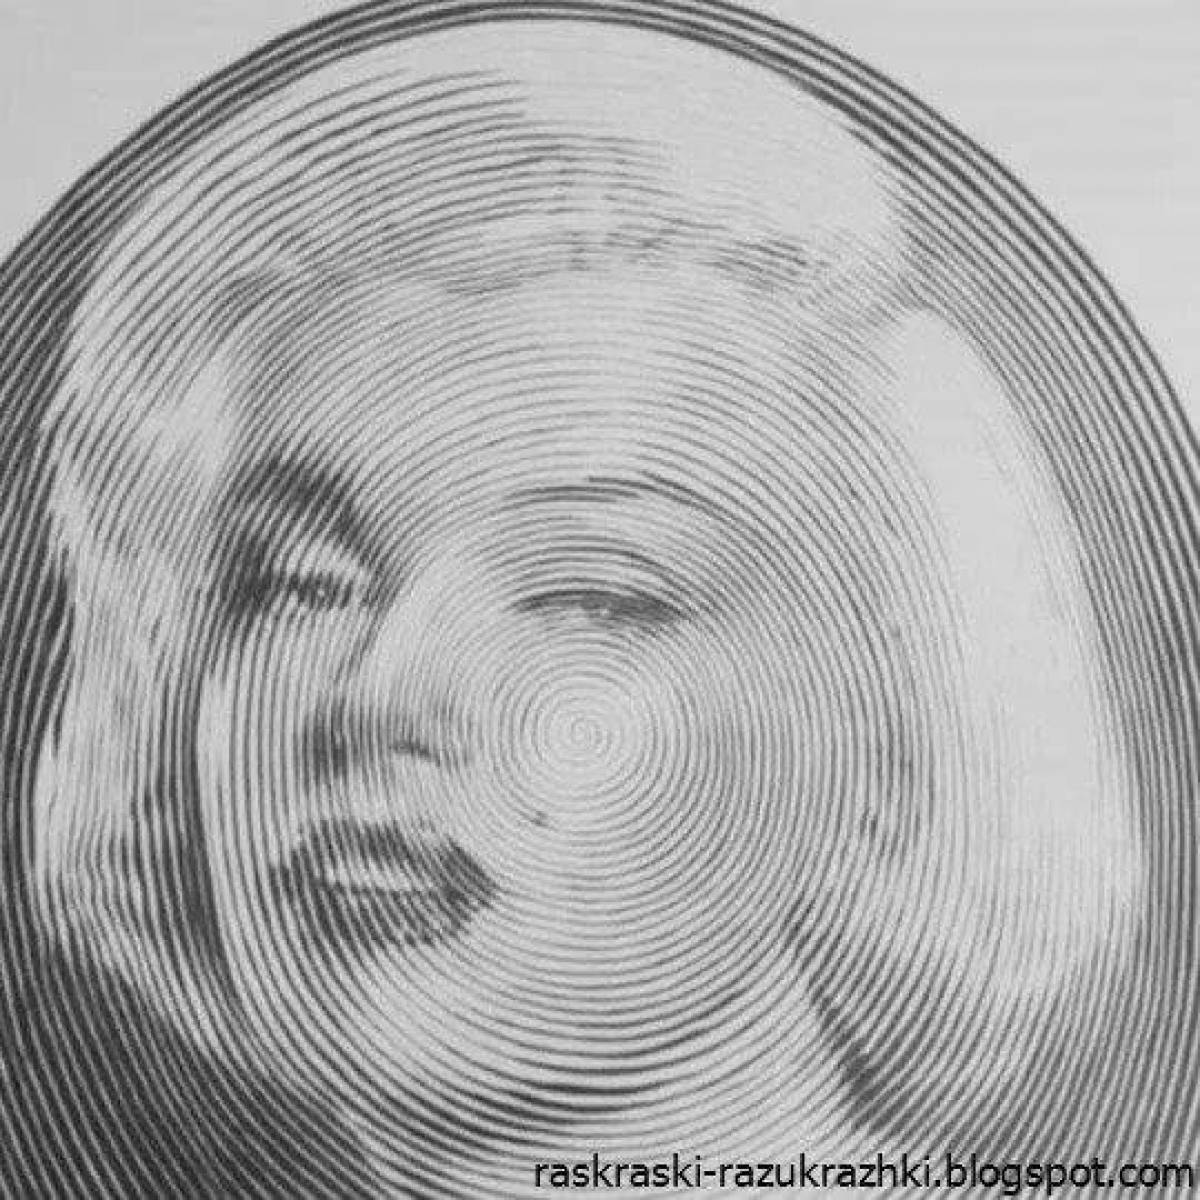 Bright circular portrait from a photograph